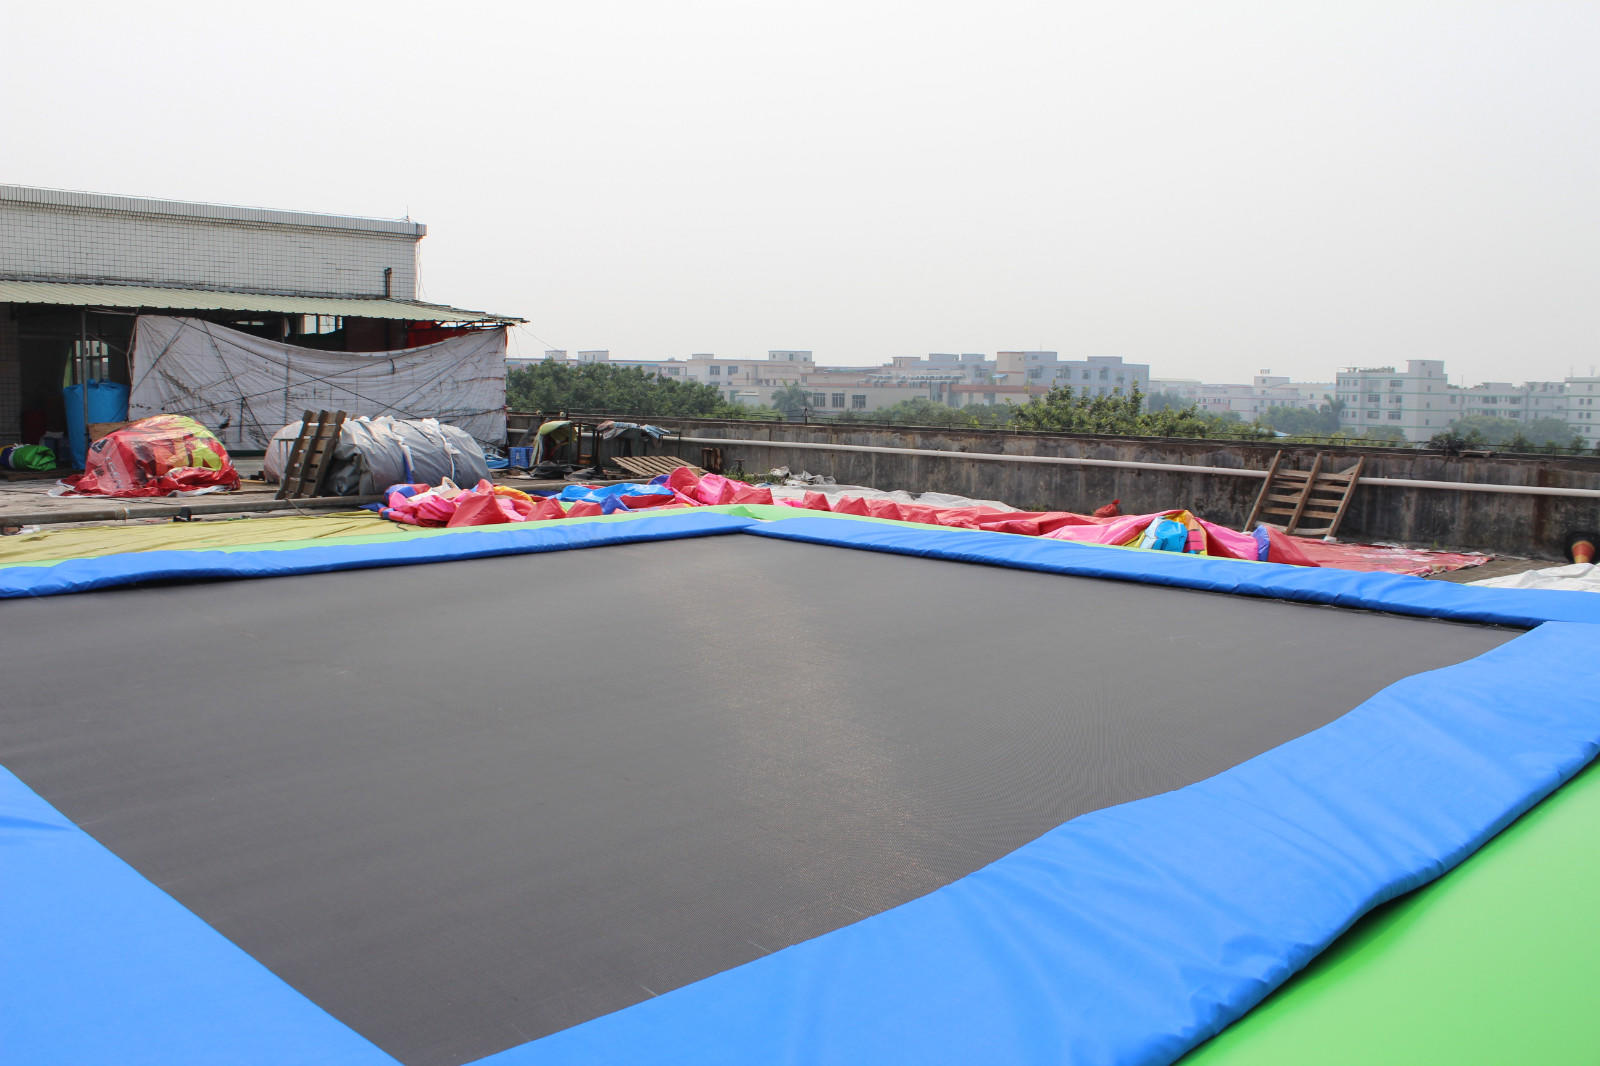 JOY inflatable lake inflatable lake trampoline wholesale for children